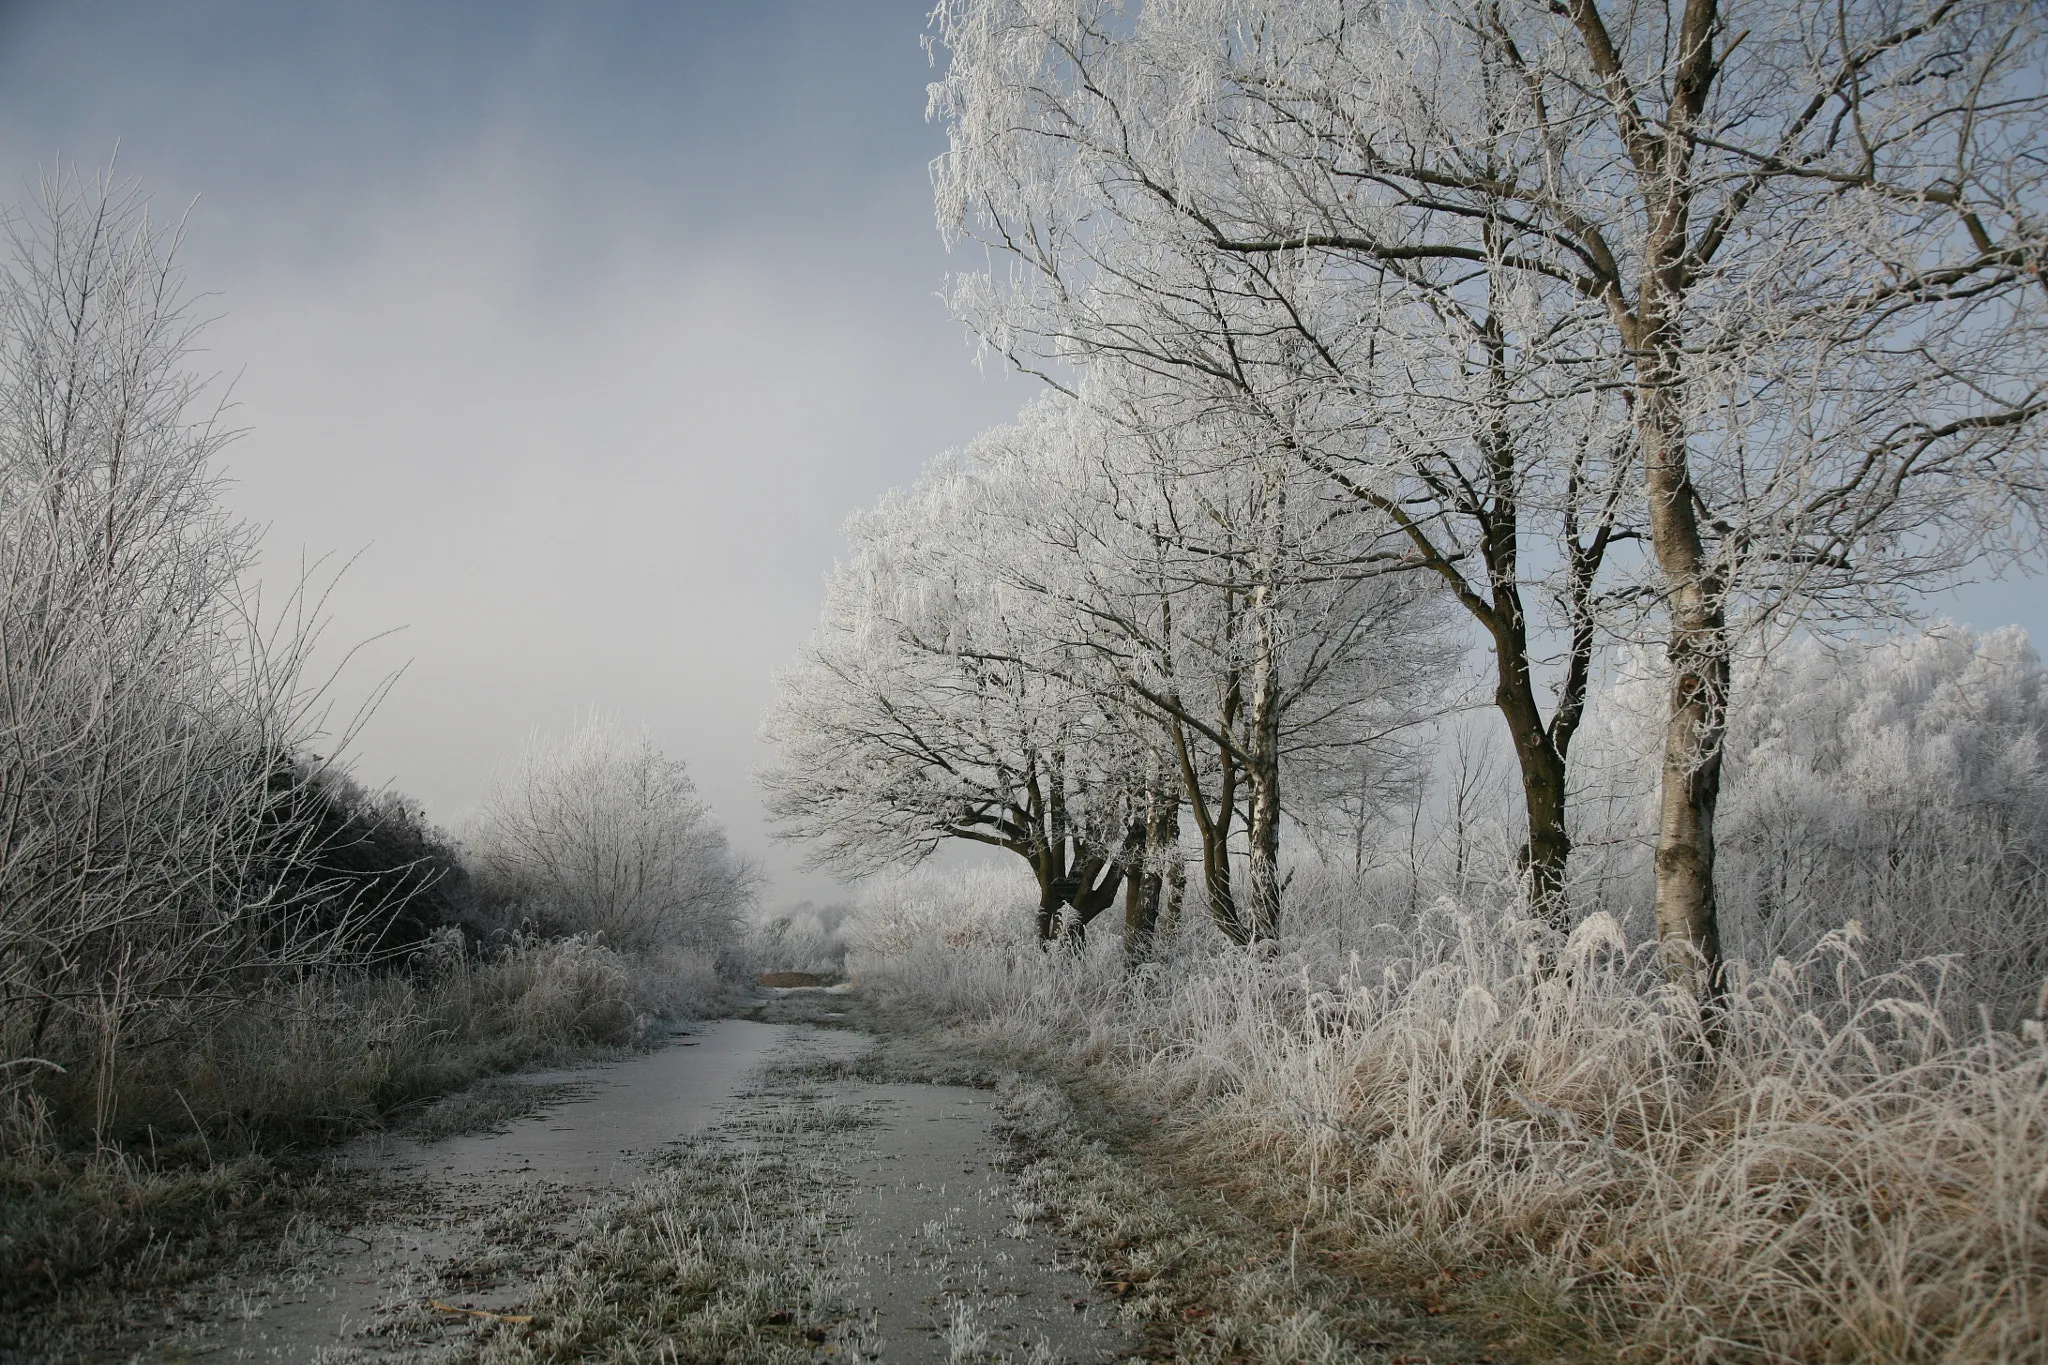 Photo showing: 500px provided description: Hoar frost or soft rime on a cold winter day in Lower Saxony, Germany. [#winter ,#frost]